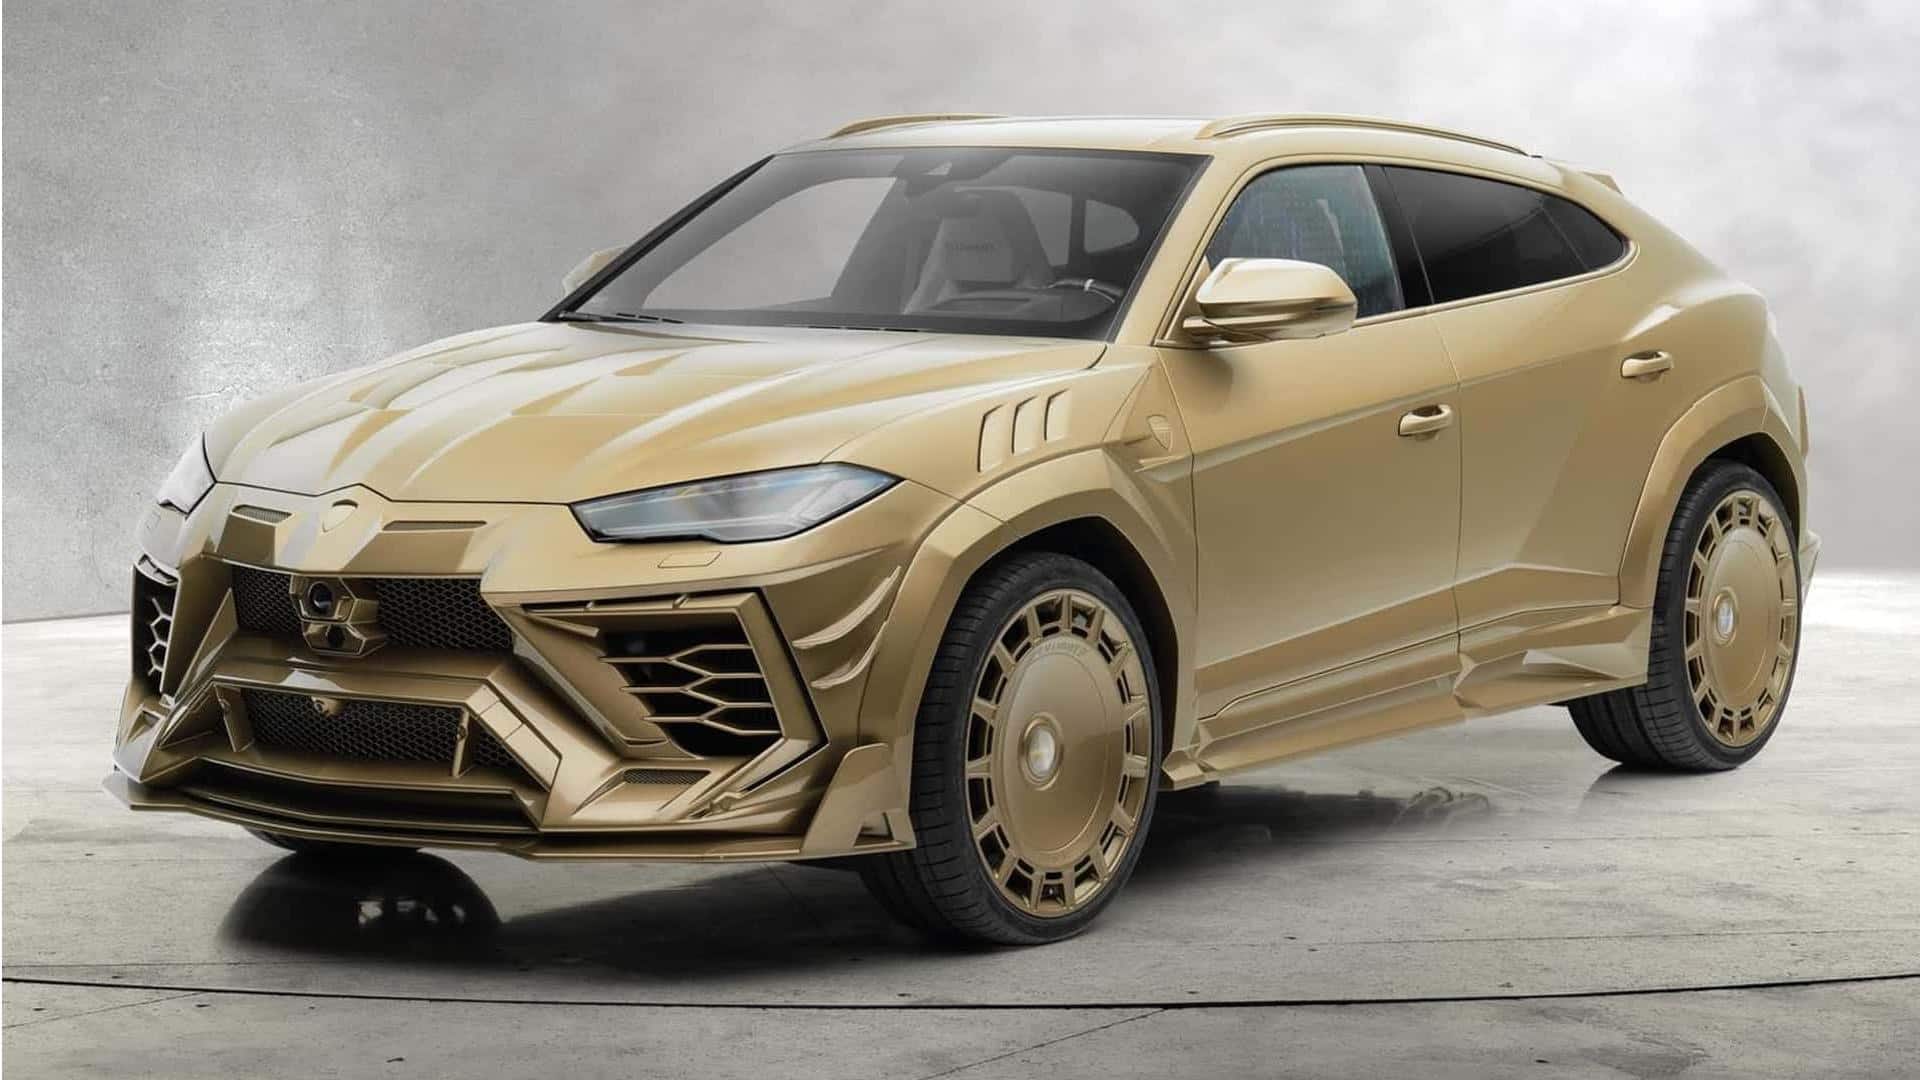 Mansory Venatus Lamborghini Urus unveiled with an in-your-face gold color